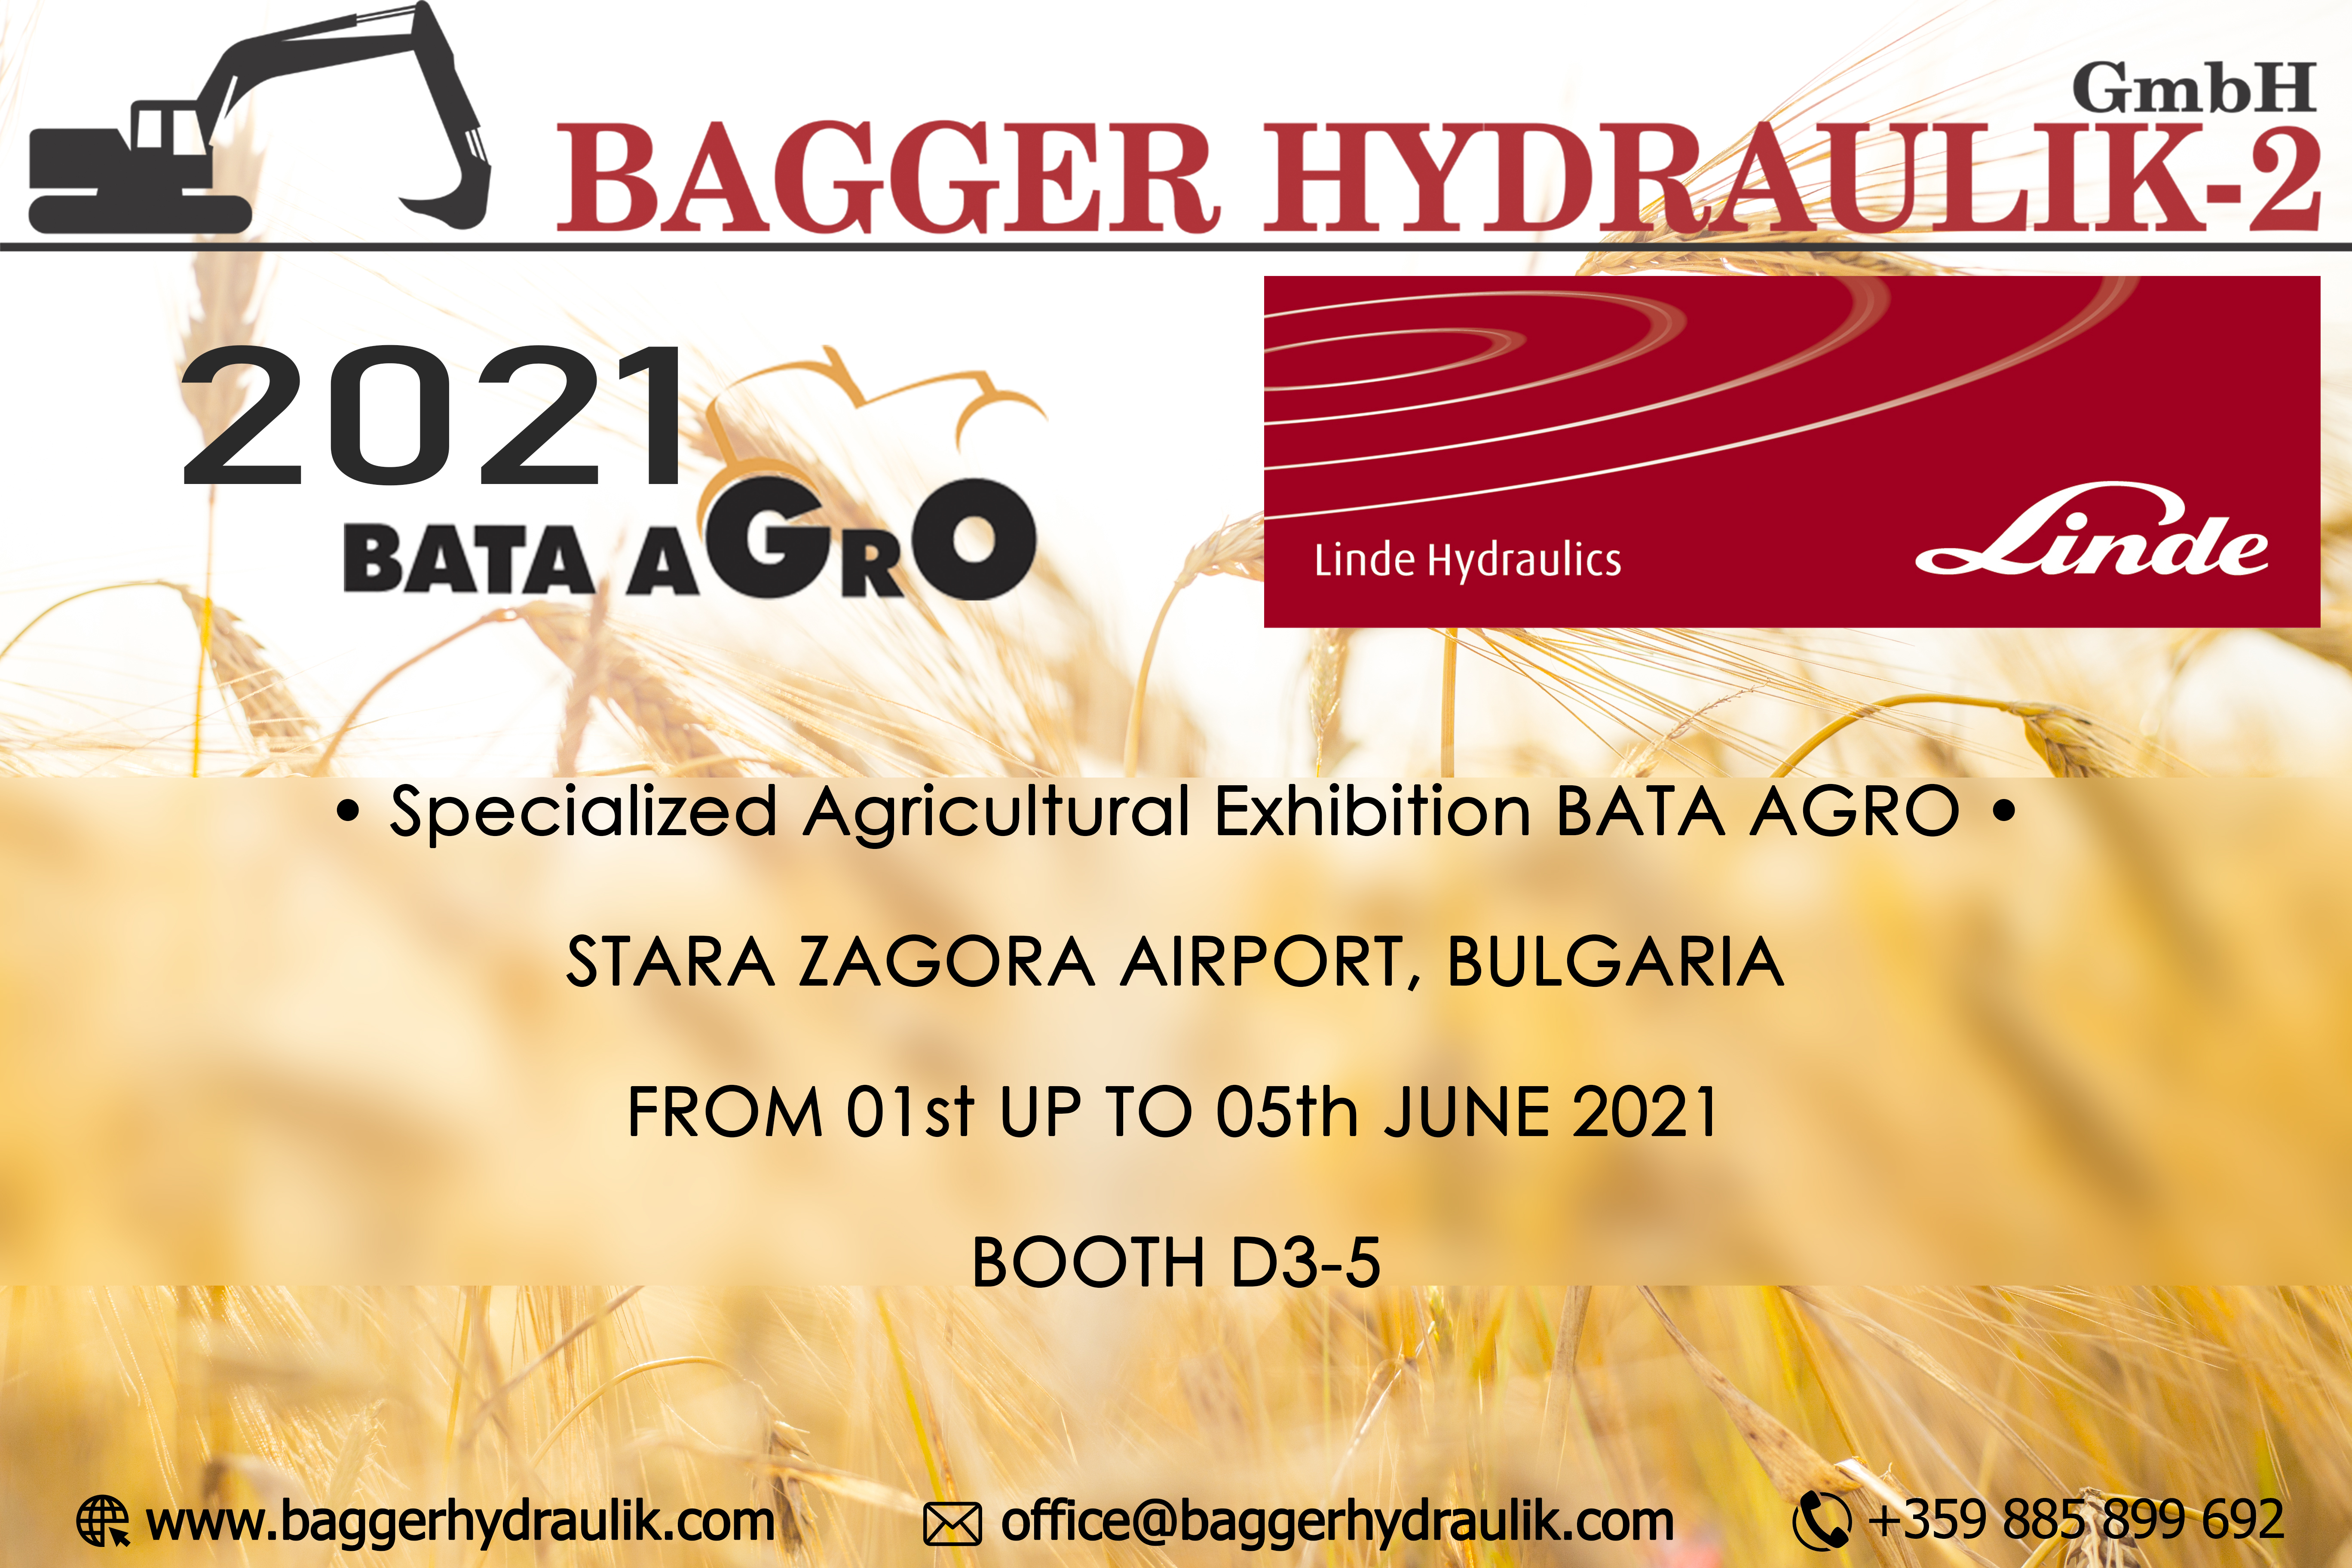 Specialized Exhibition of Agriculture BATA AGRO 2021